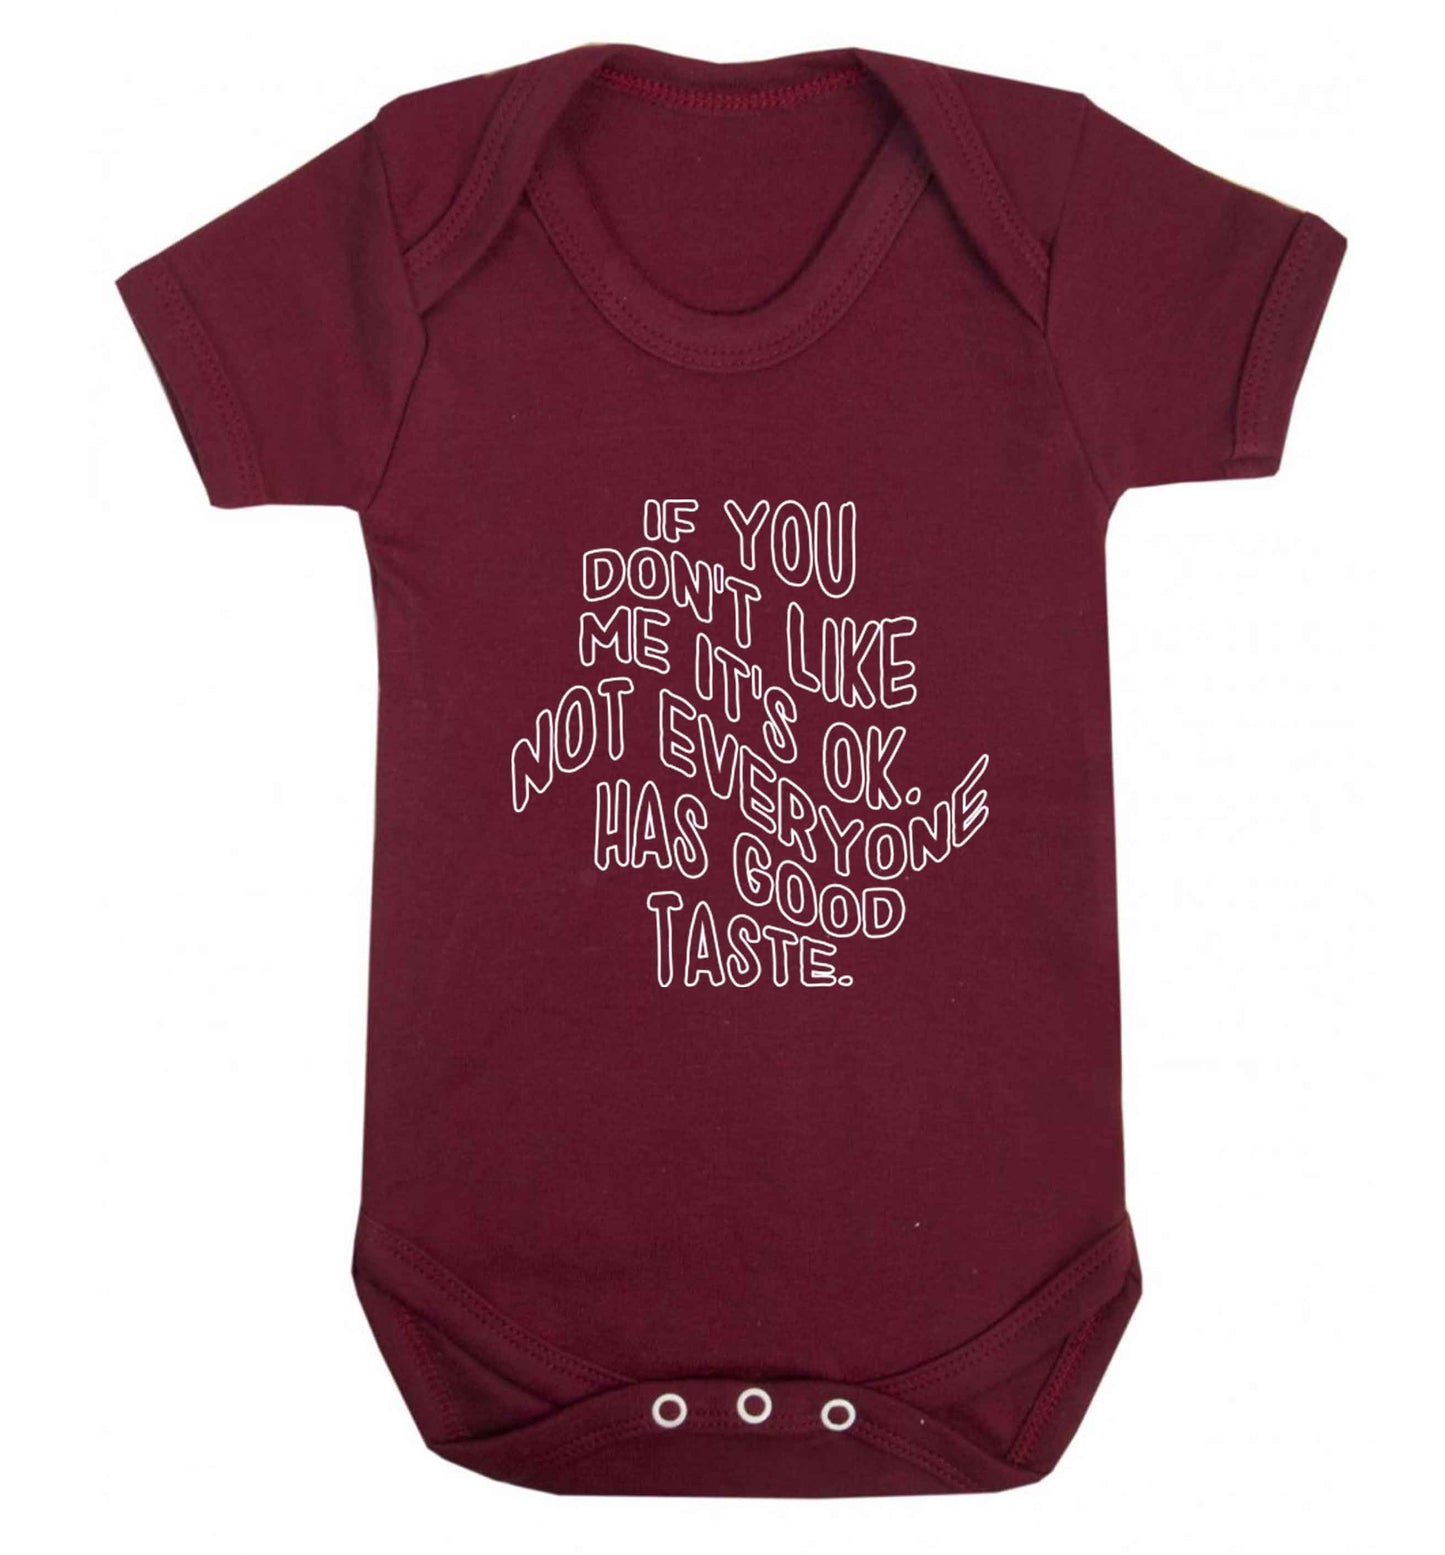 If you don't like me it's ok not everyone has good taste baby vest maroon 18-24 months